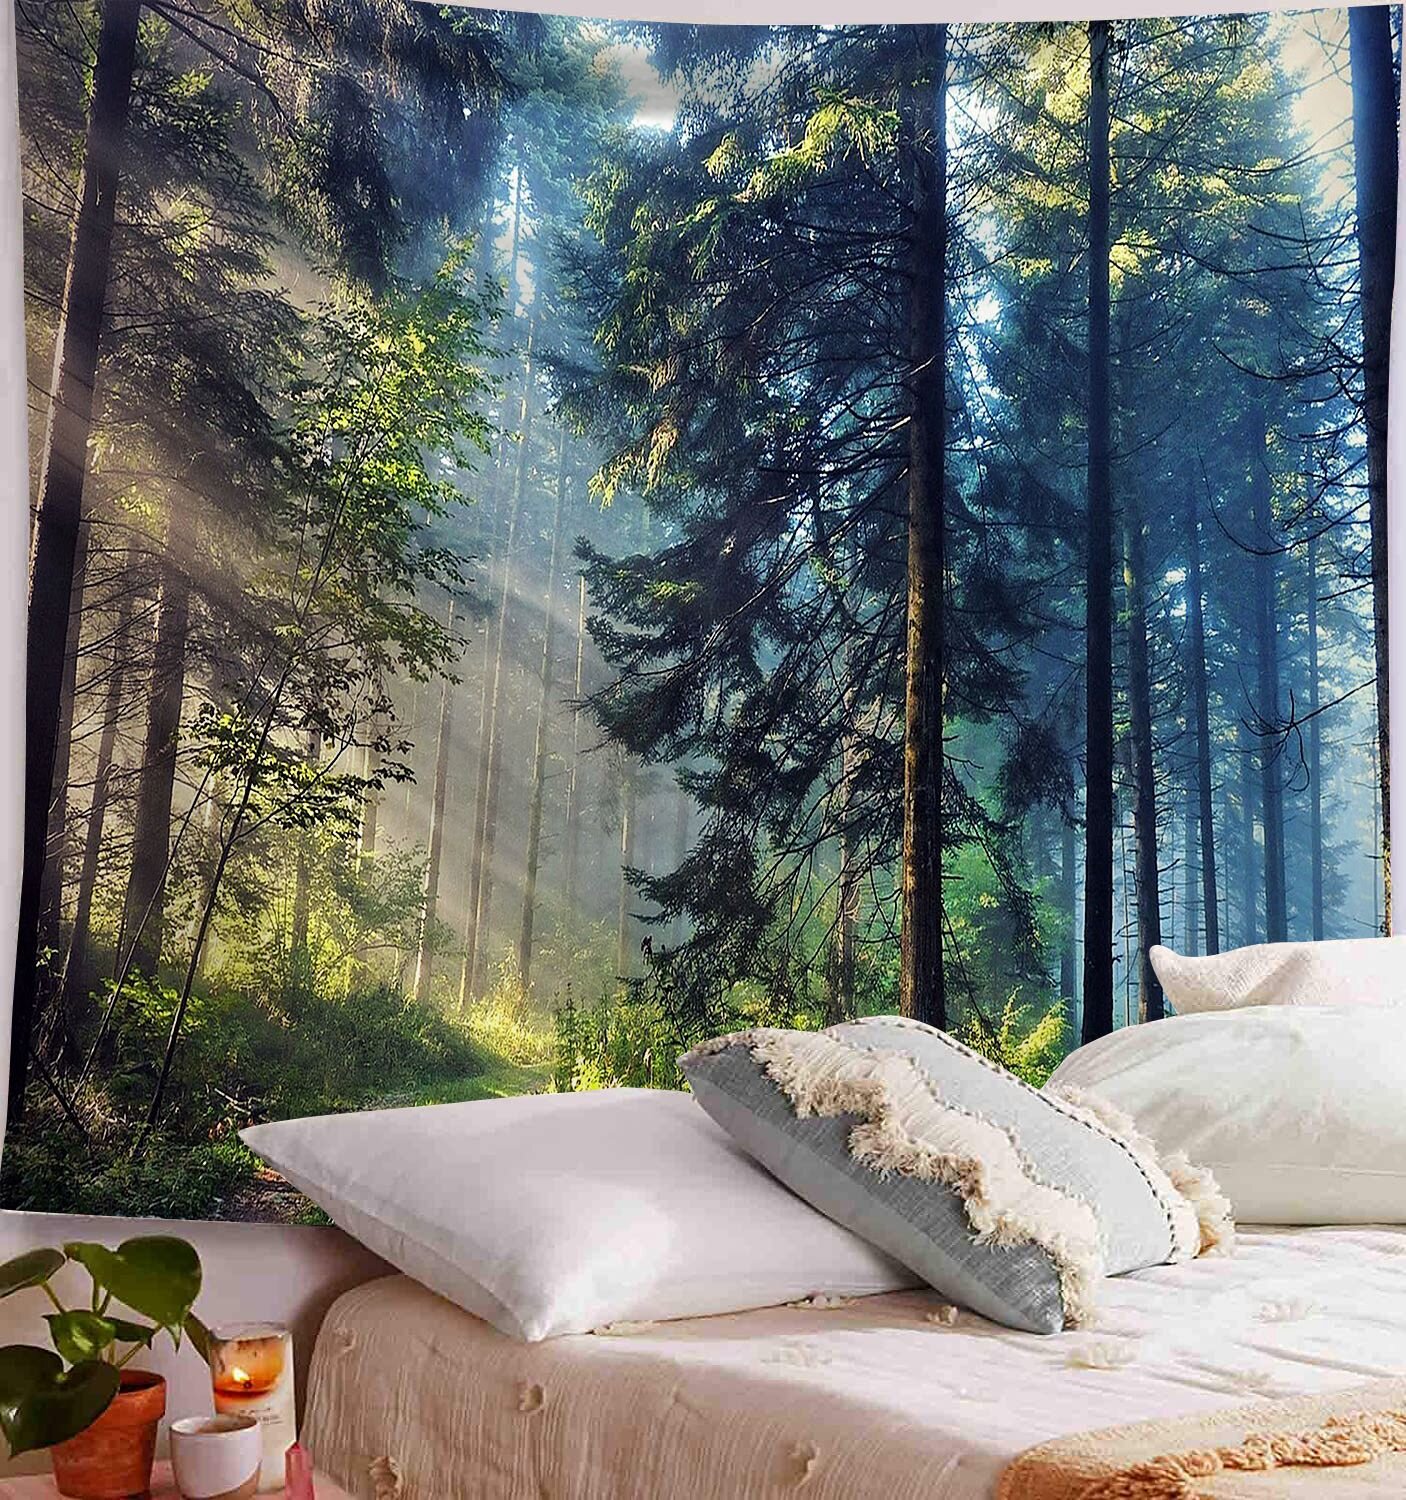 Forest Tapestry,Nature Tapestry Wall Hanging,Scenery Wall Tapestry,Fabric Tapestry,Picture On Wall,Large Tapestry For Wall Decor,Home decor